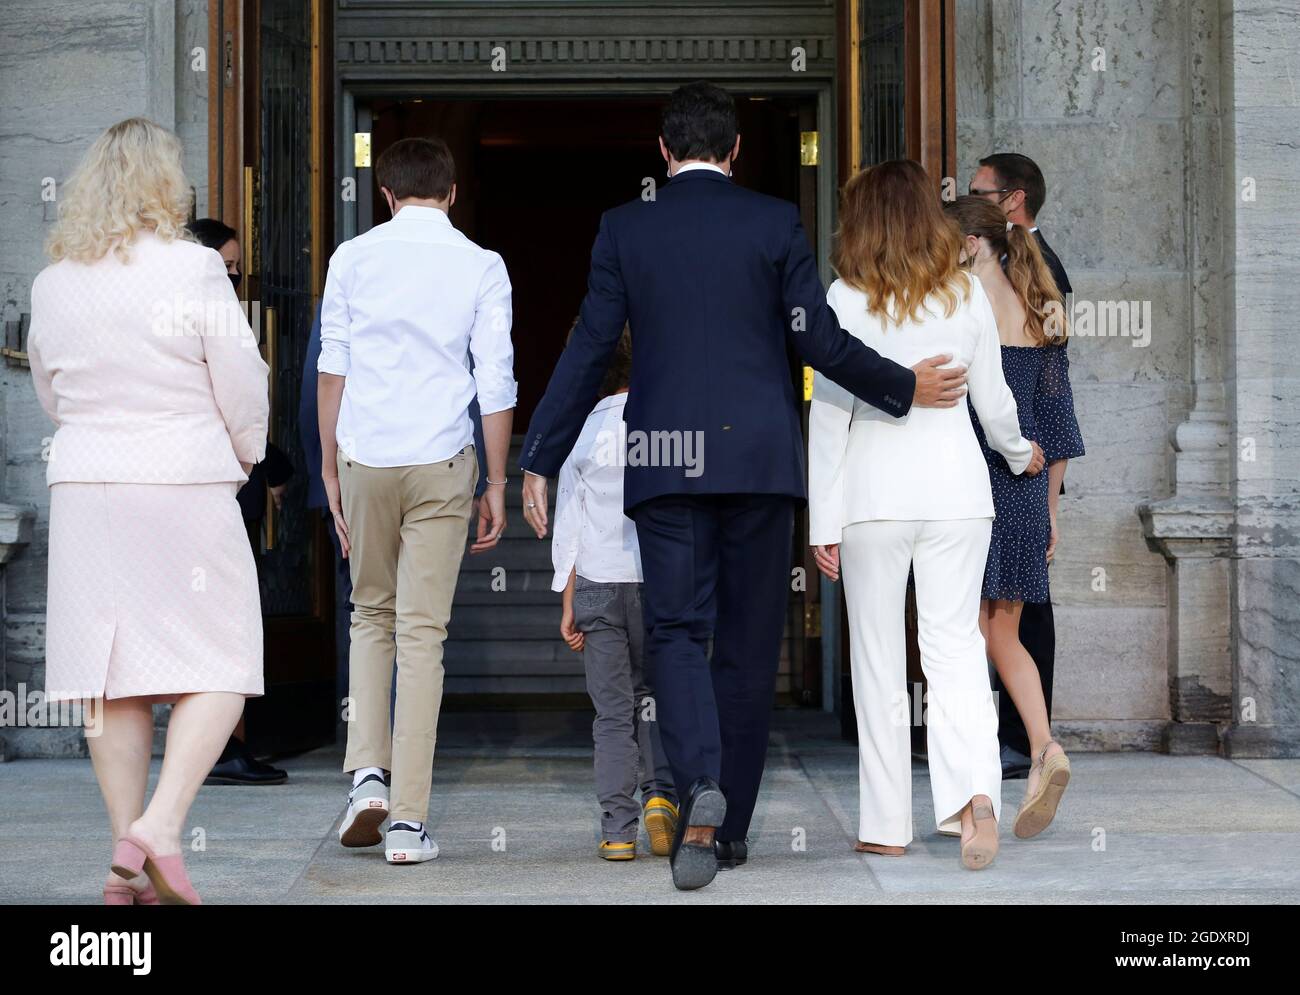 Canada's Prime Minister Justin Trudeau attends Rideau Hall with his wife  Sophie Gregoire and their children Ella-Grace, Xavier and Hadrien, to speak  with Governor General Mary Simon in Ottawa, Ontario, Canada, August